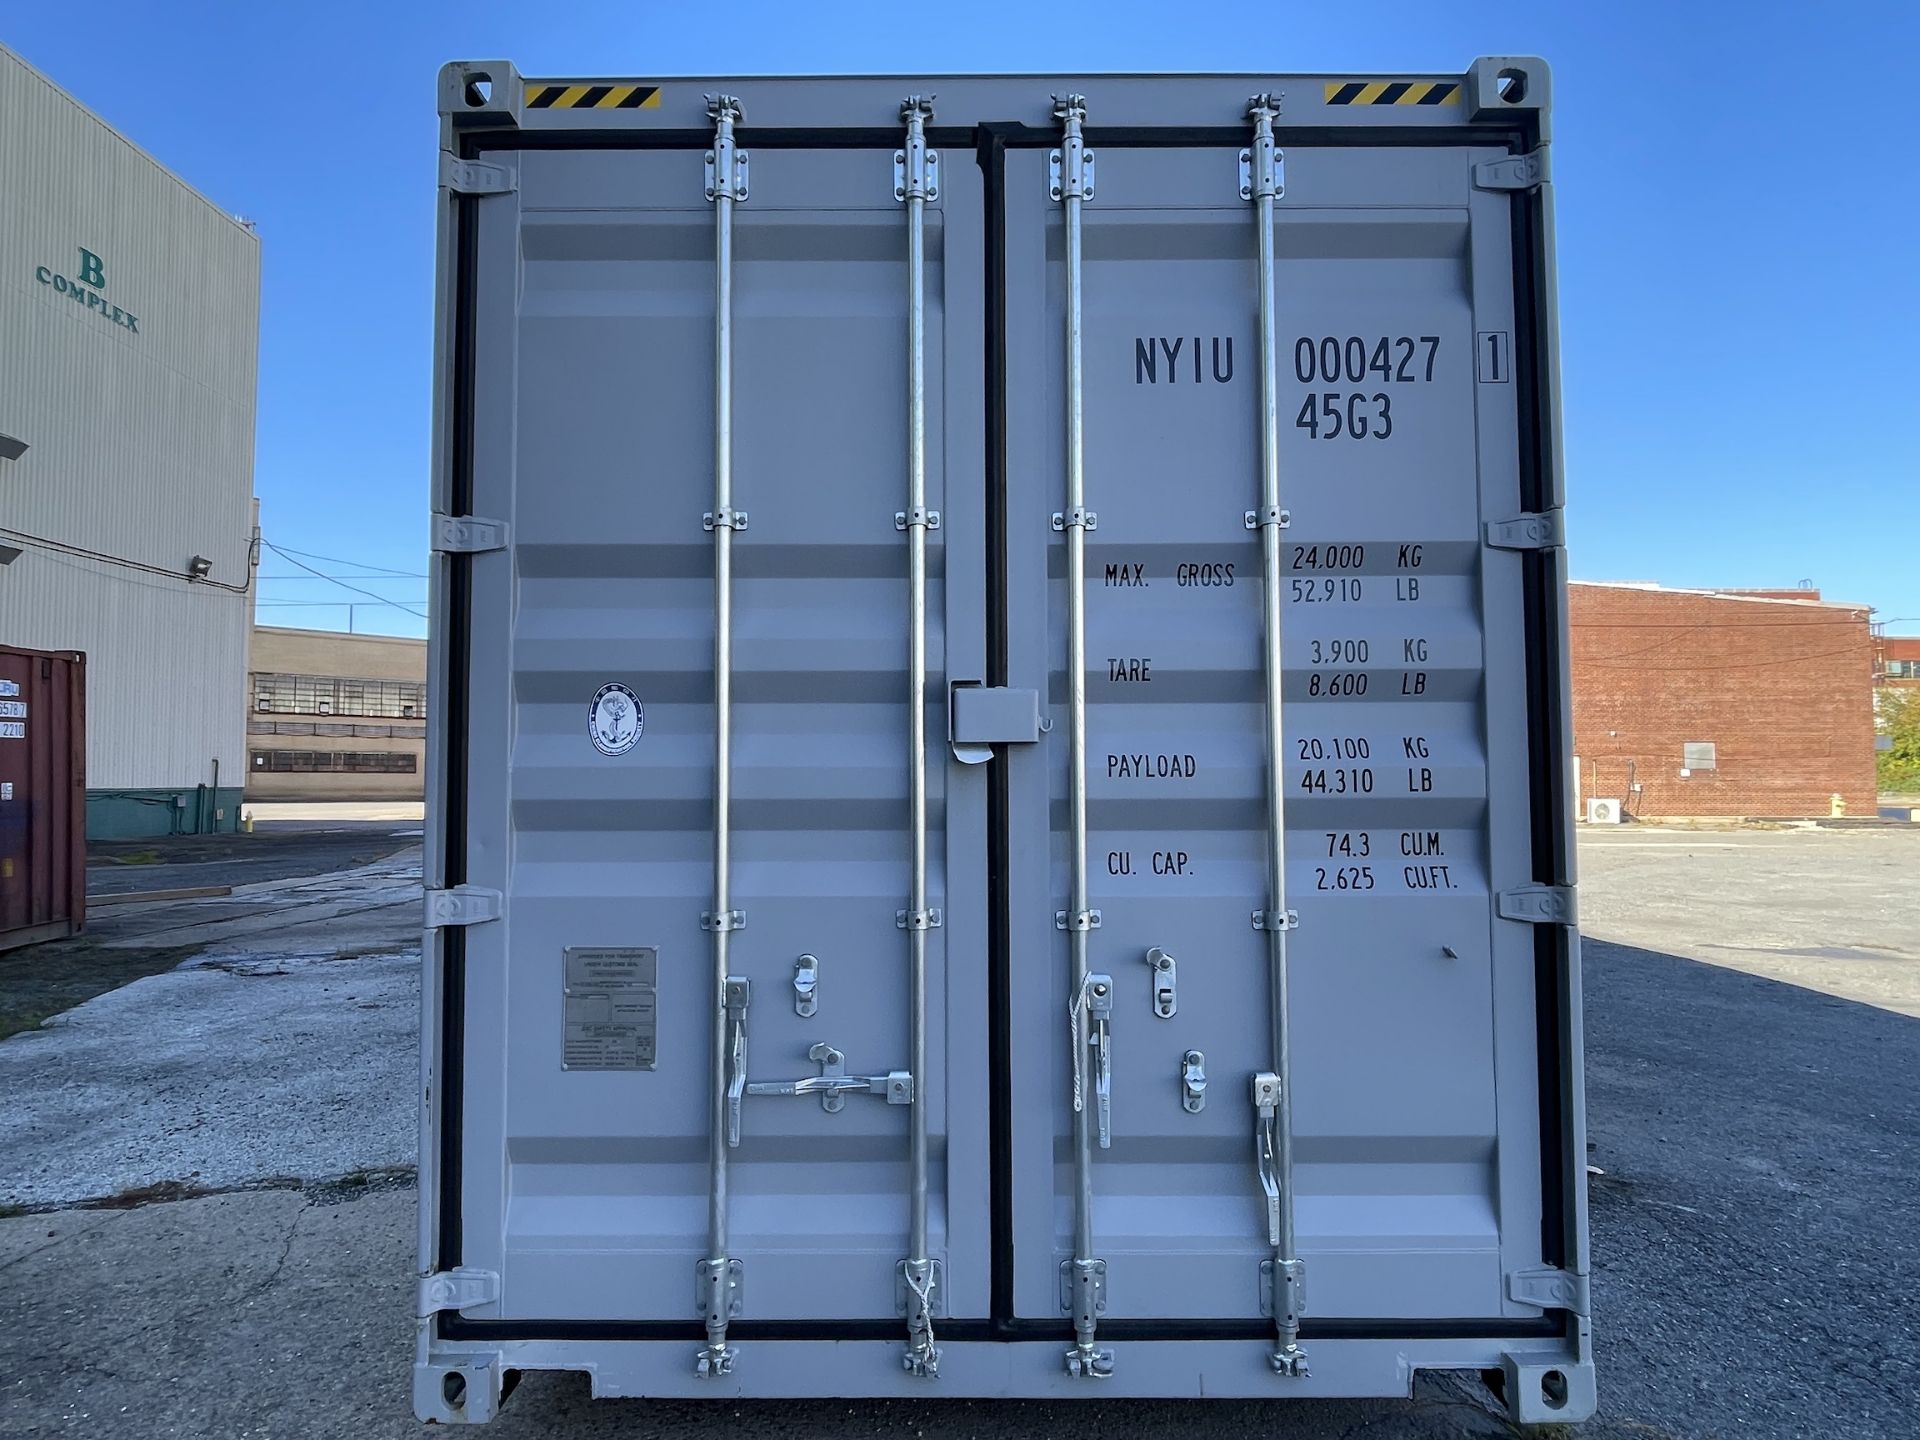 Brand New 40ft 2 Side Door Storage Container (NY127) - Image 4 of 12